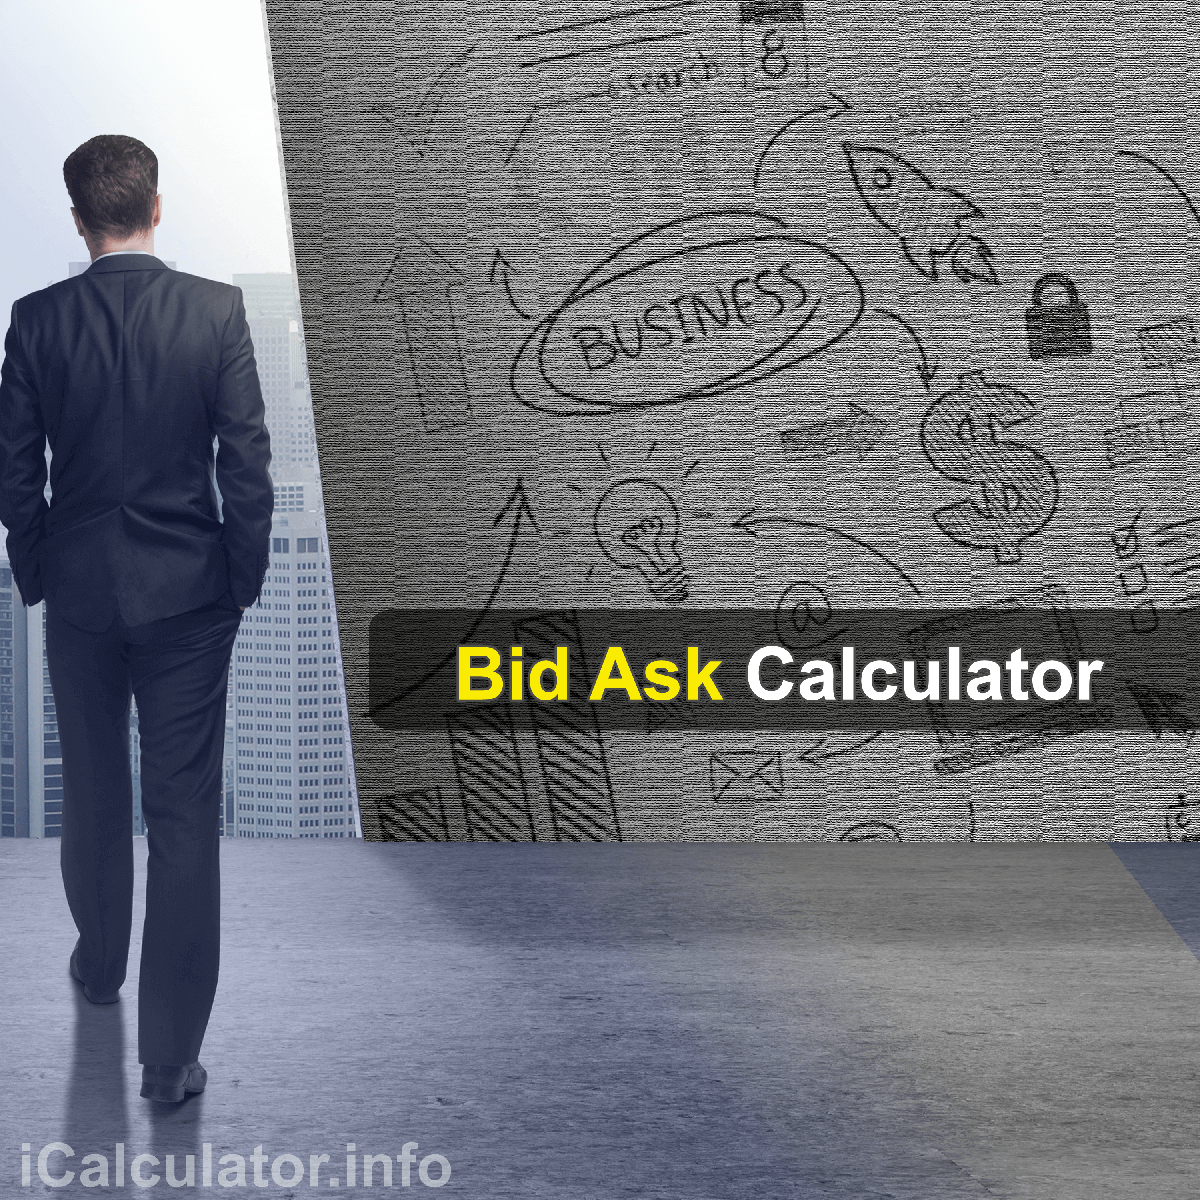 Bid-Ask Calculator. This image provides details of how to calculate Bid-Ask using a calculator and notepad. By using the Bid-Ask formula, the Bid-Ask Calculator provides a true calculation of the price of sale and purchase of stocks that affects the entire stock profitability of a portfolio